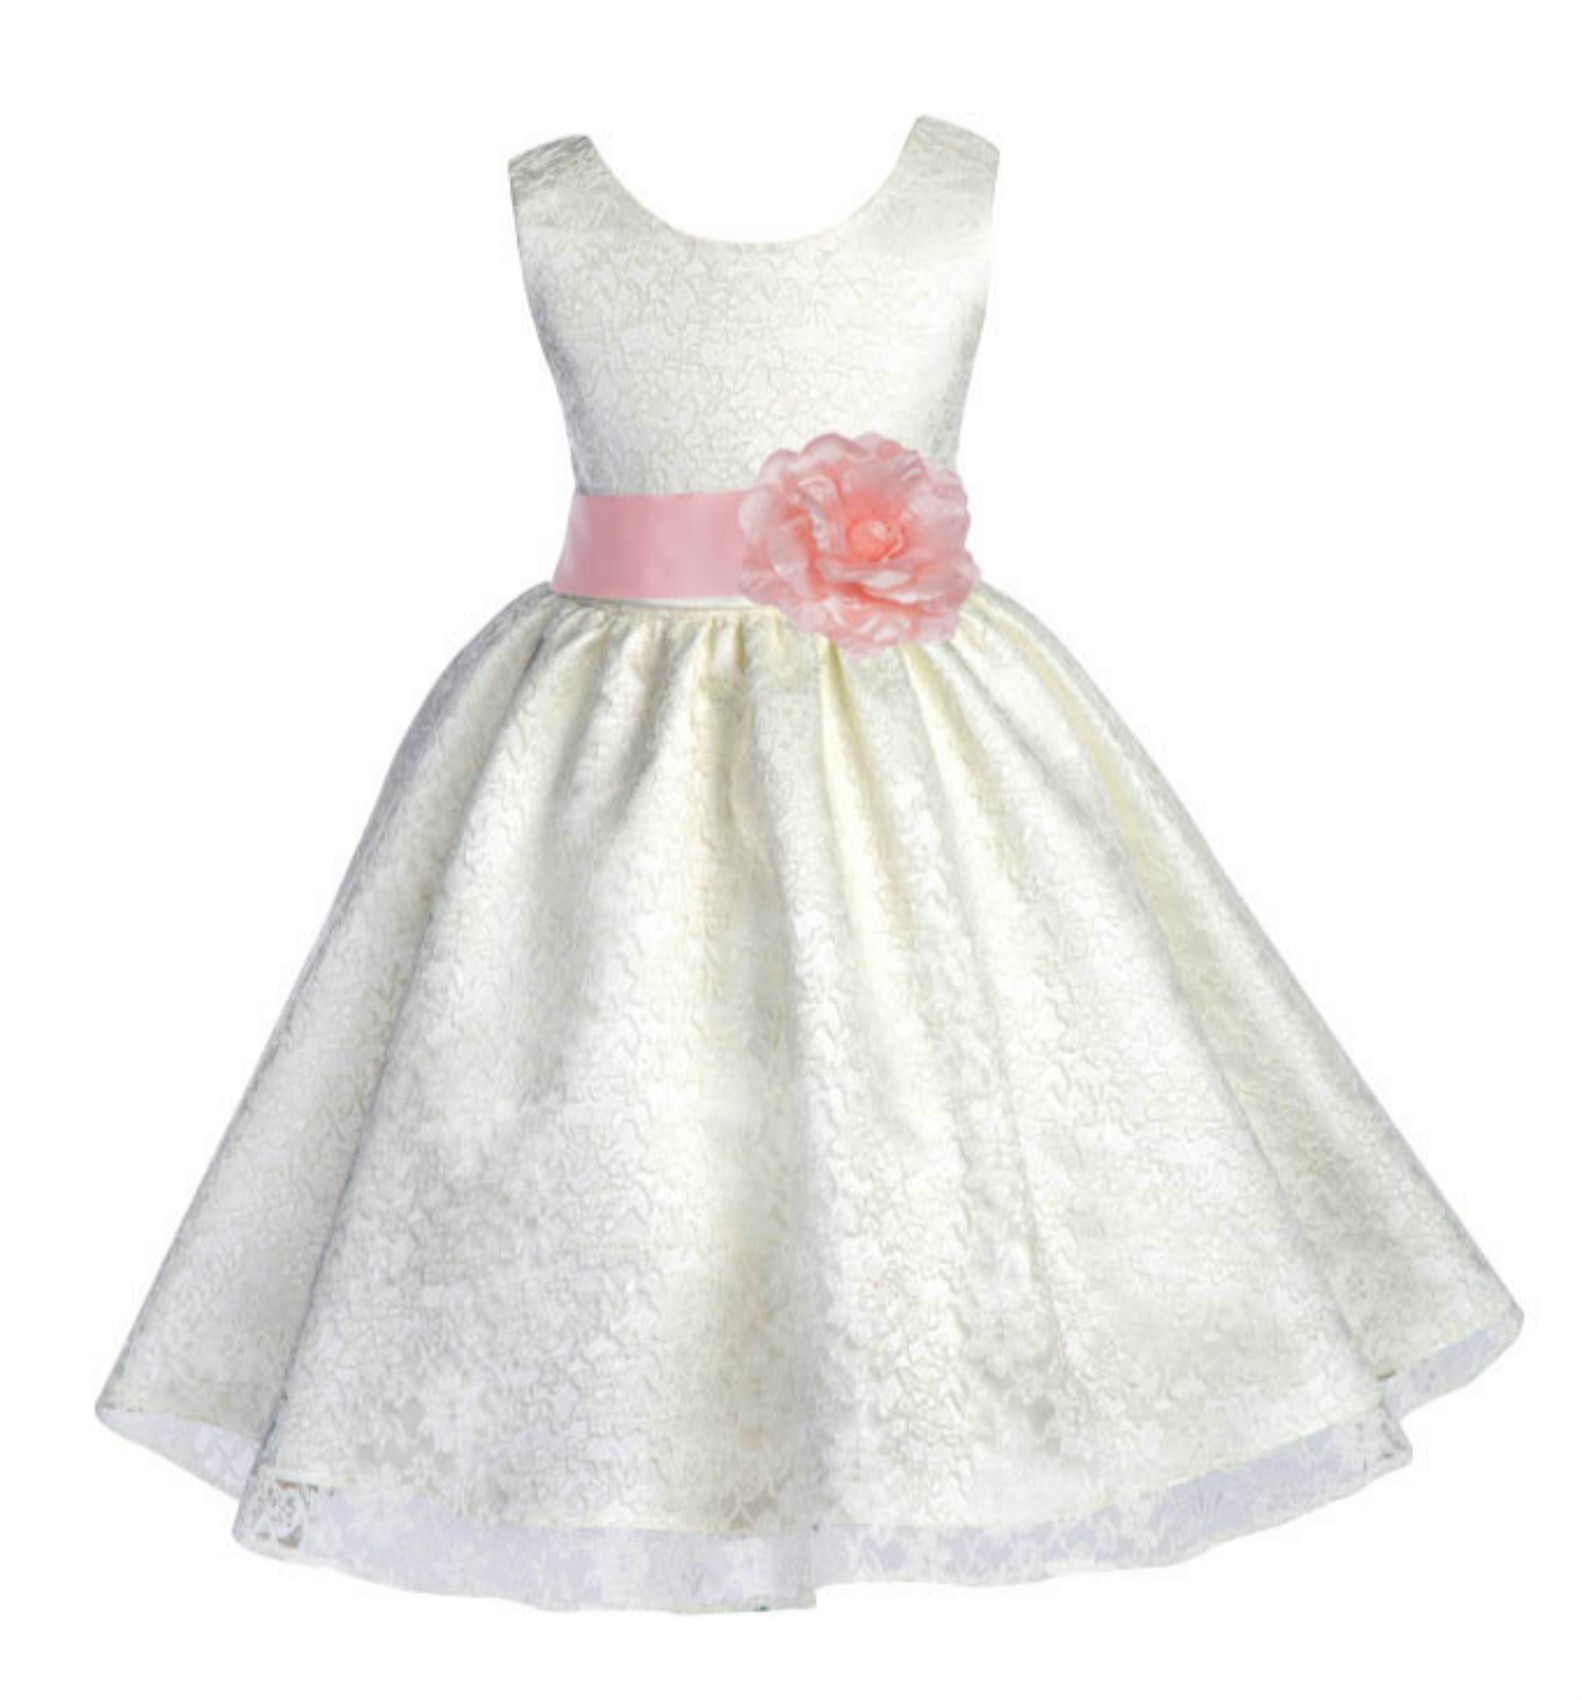 Ivory/Peach Floral Lace Overlay Flower Girl Dress Special Event 163S